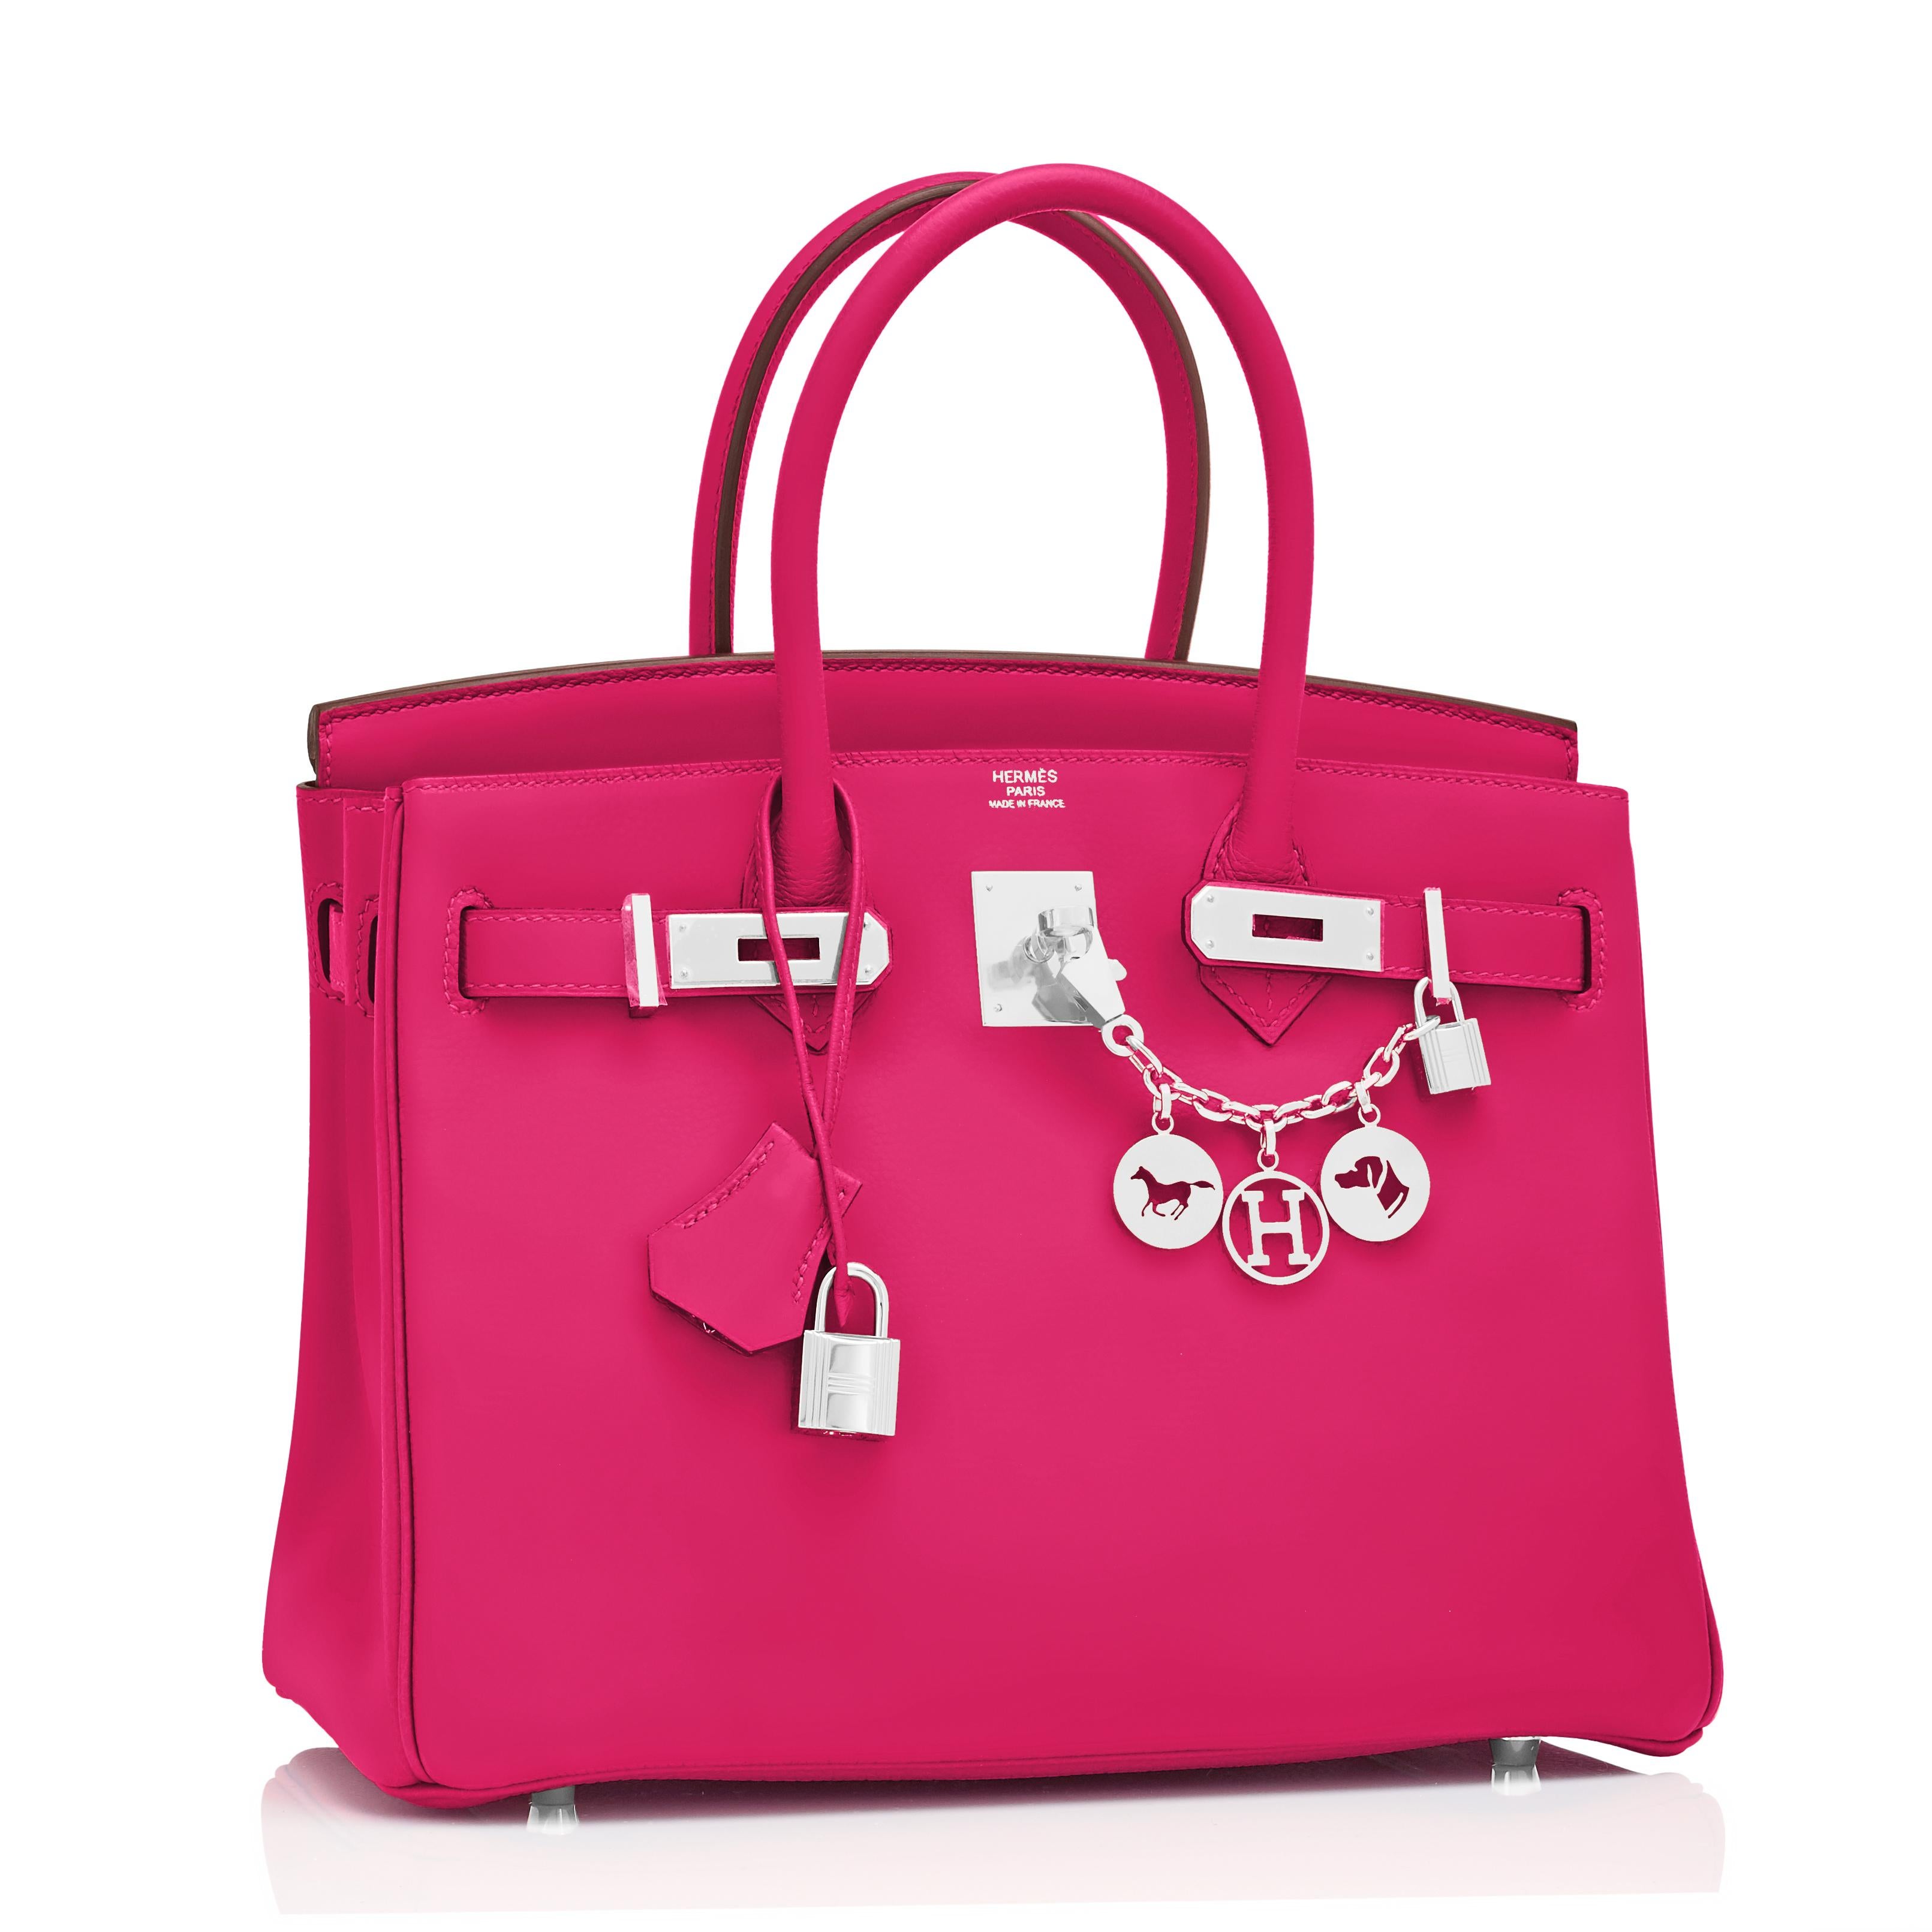 Hermes Birkin 30 Rose Shocking Jonathan Bag Pink Palladium Y Stamp, 2020
Drop-dead gorgeous cult-favorite Rose Shocking has arrived!
Brand New in Box.  Store Fresh.  Pristine Condition (with plastic on hardware).
Just purchased from Hermes store!